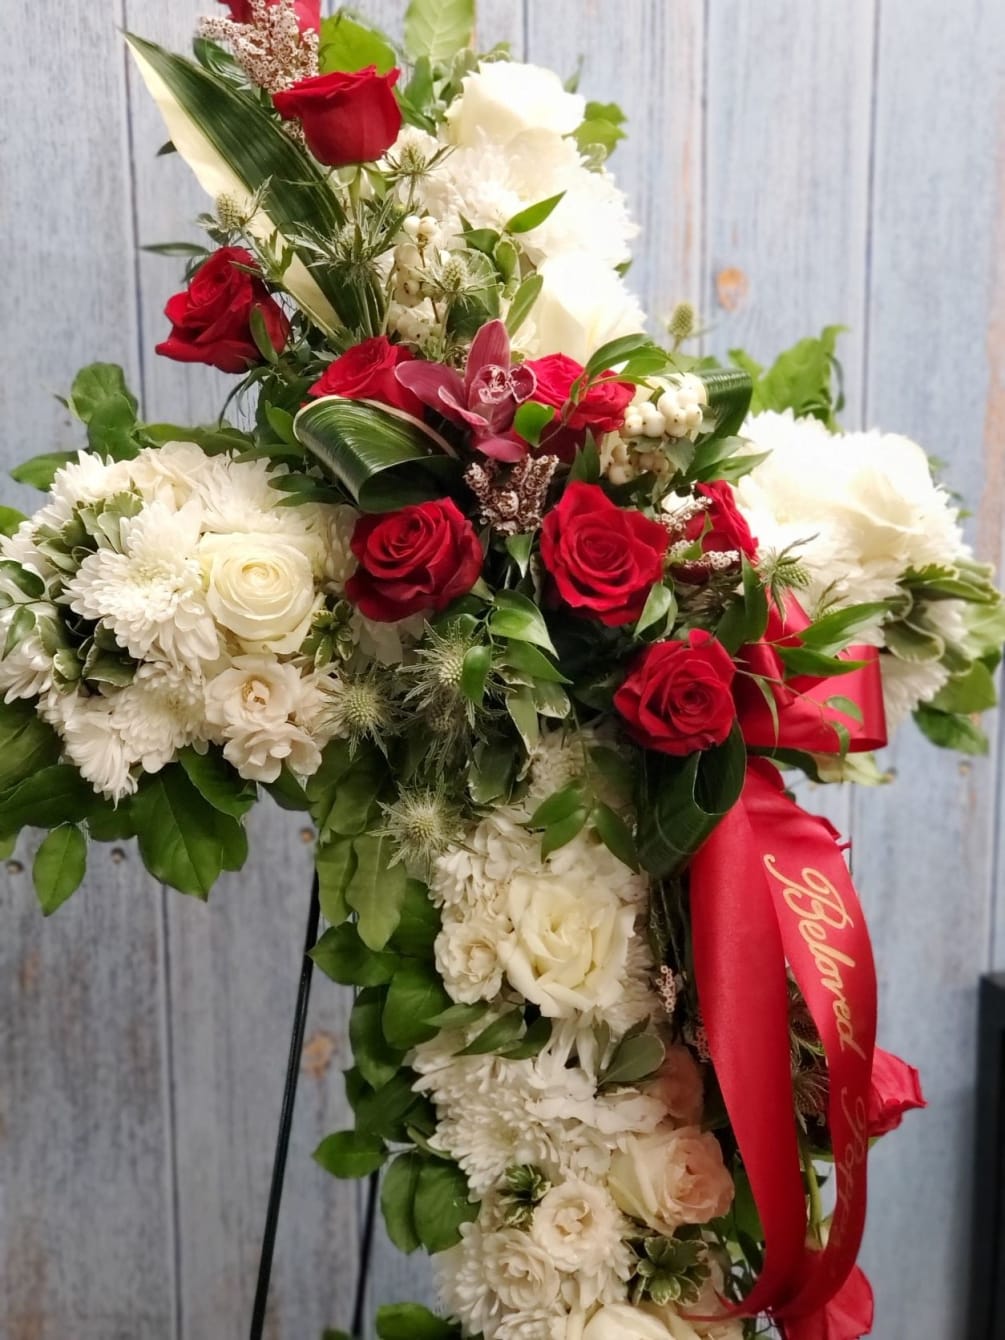 This striking combination of white foundation blooms and vivid red accents is